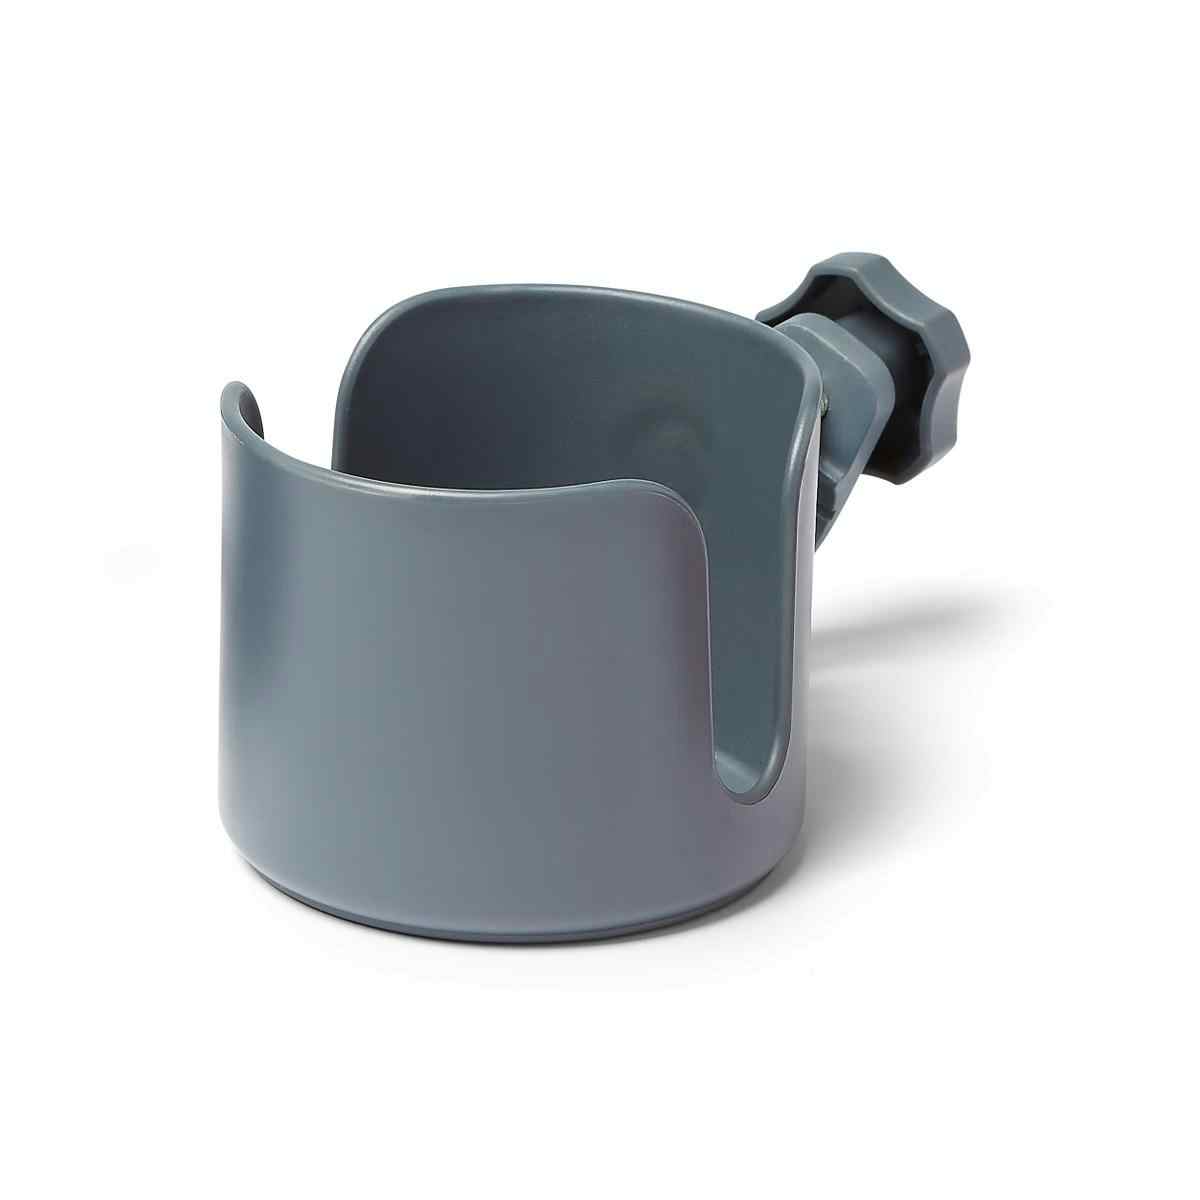 Medline Cup Holder for Wheelchairs, WCACUPG, Grey - 1 Each